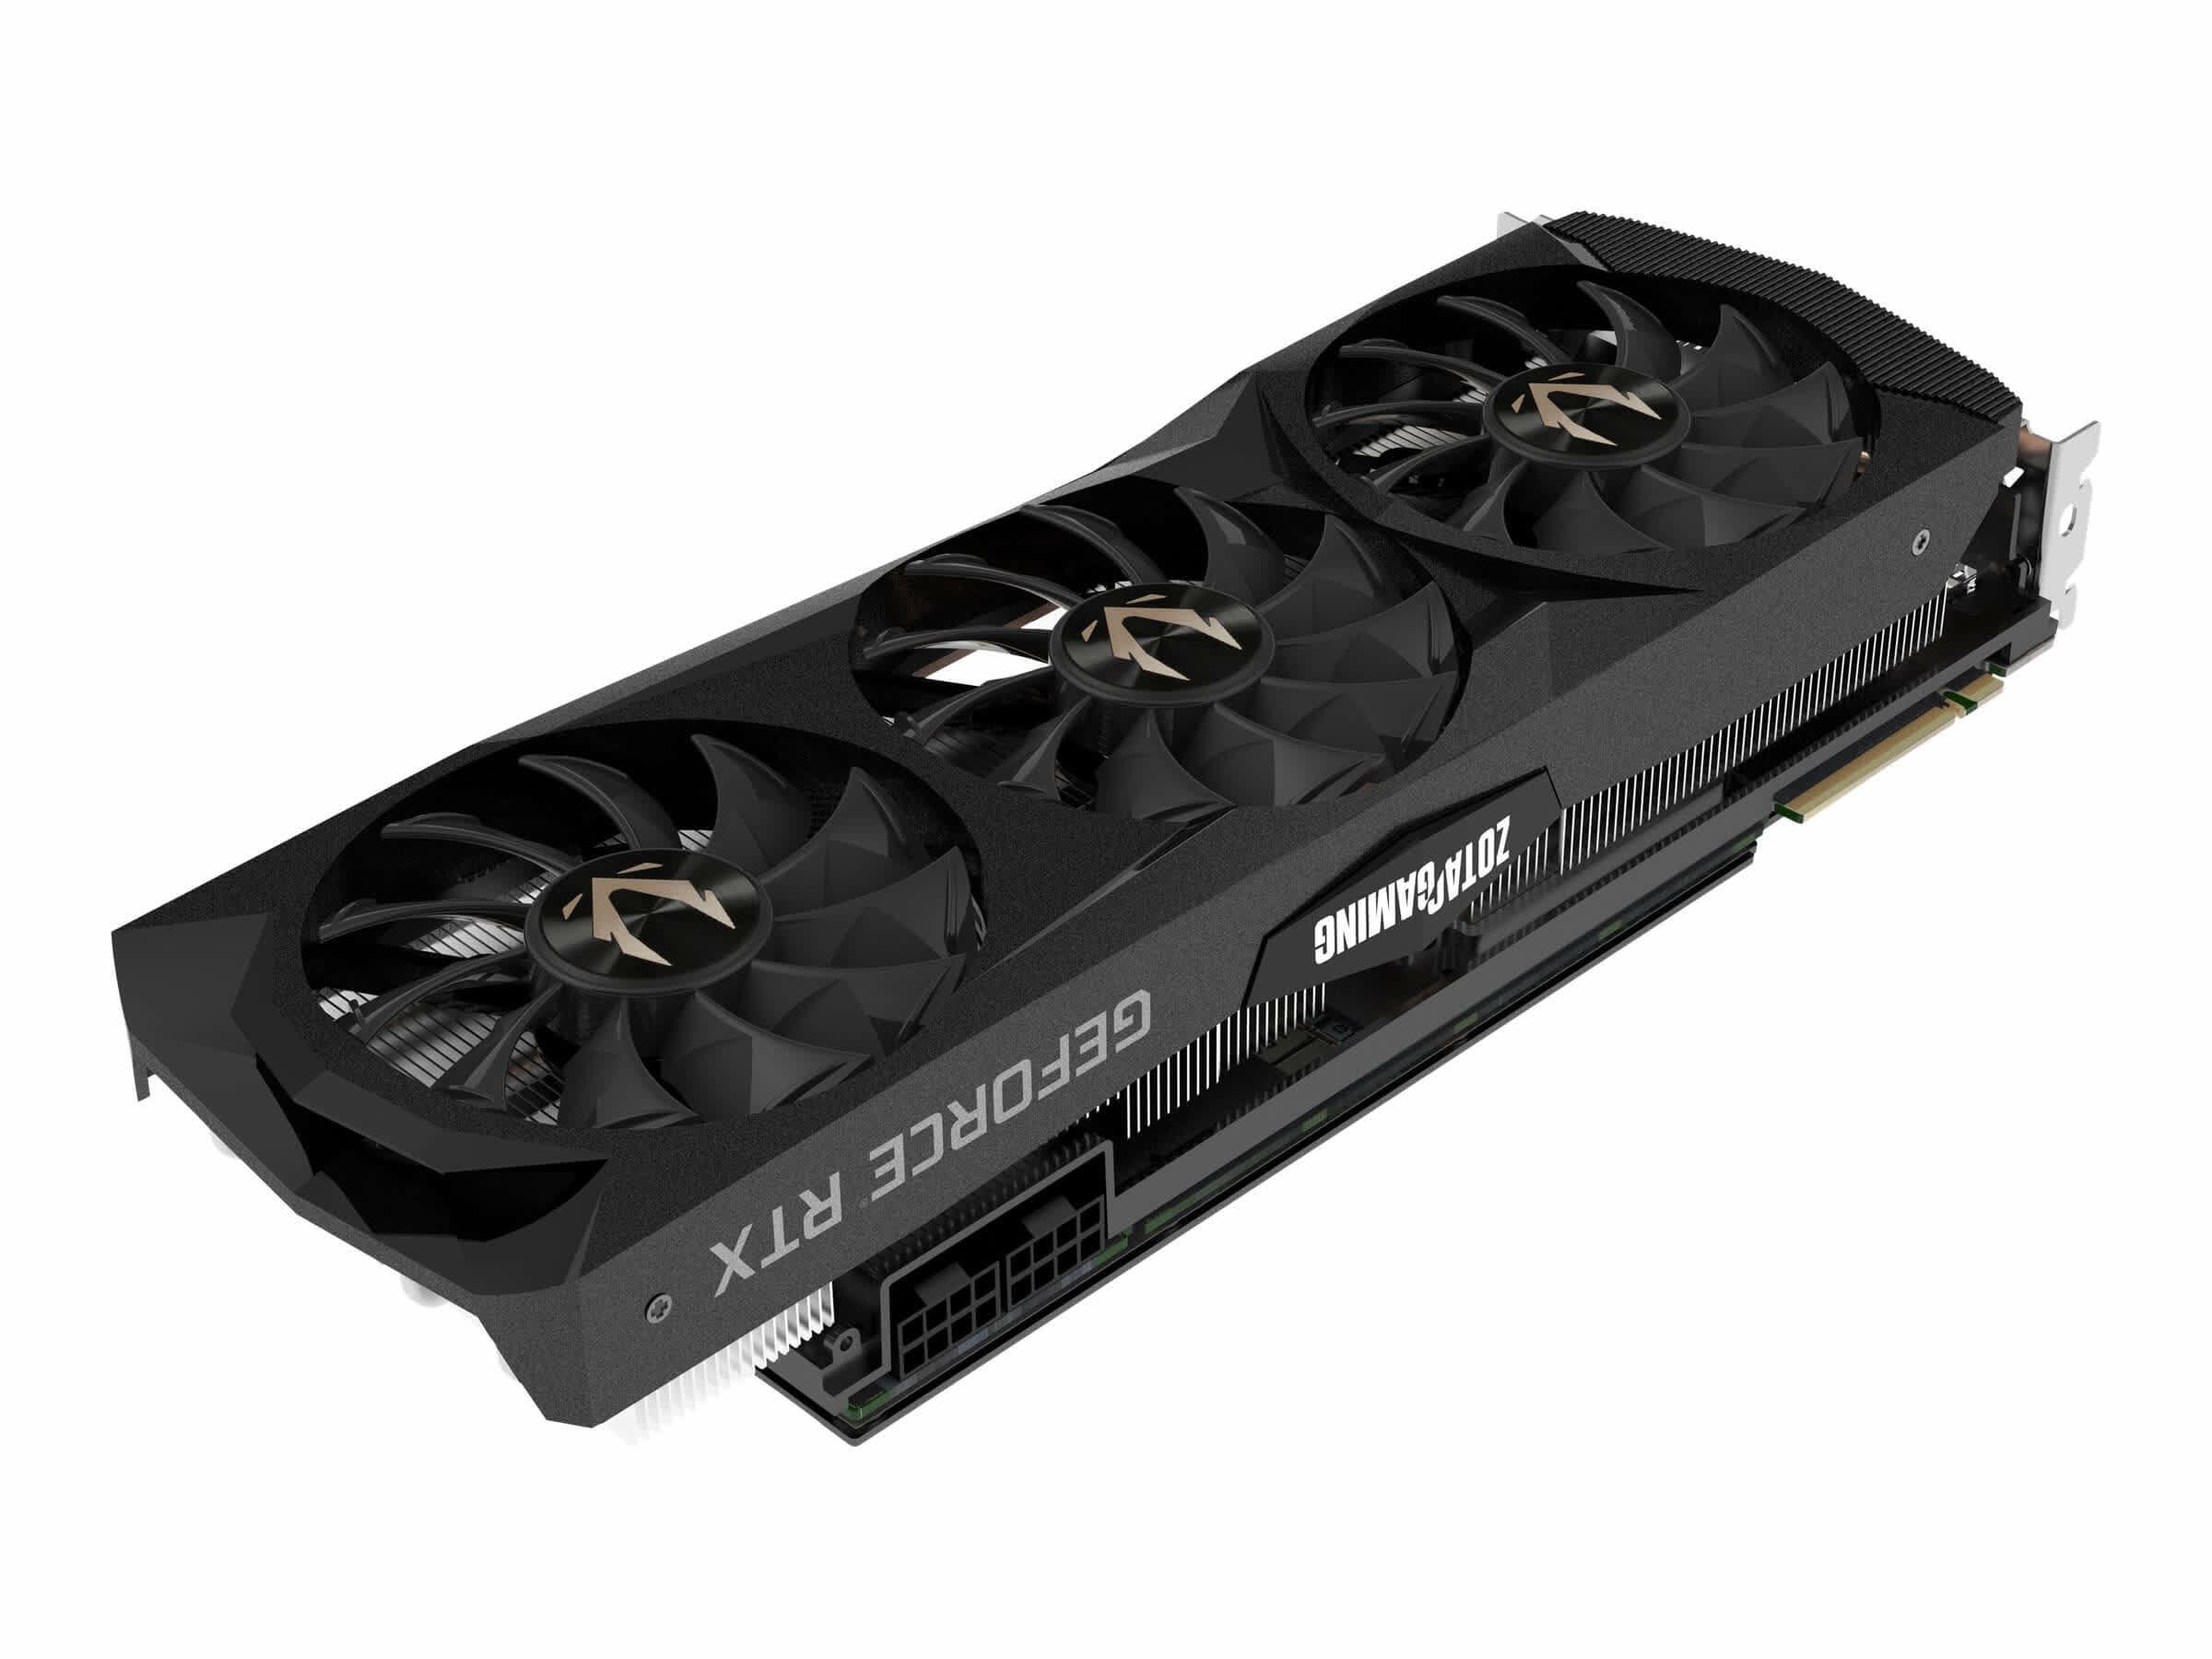 Zotac RTX 2080 Ti Gaming AMP Reviews, Pros and Cons | TechSpot